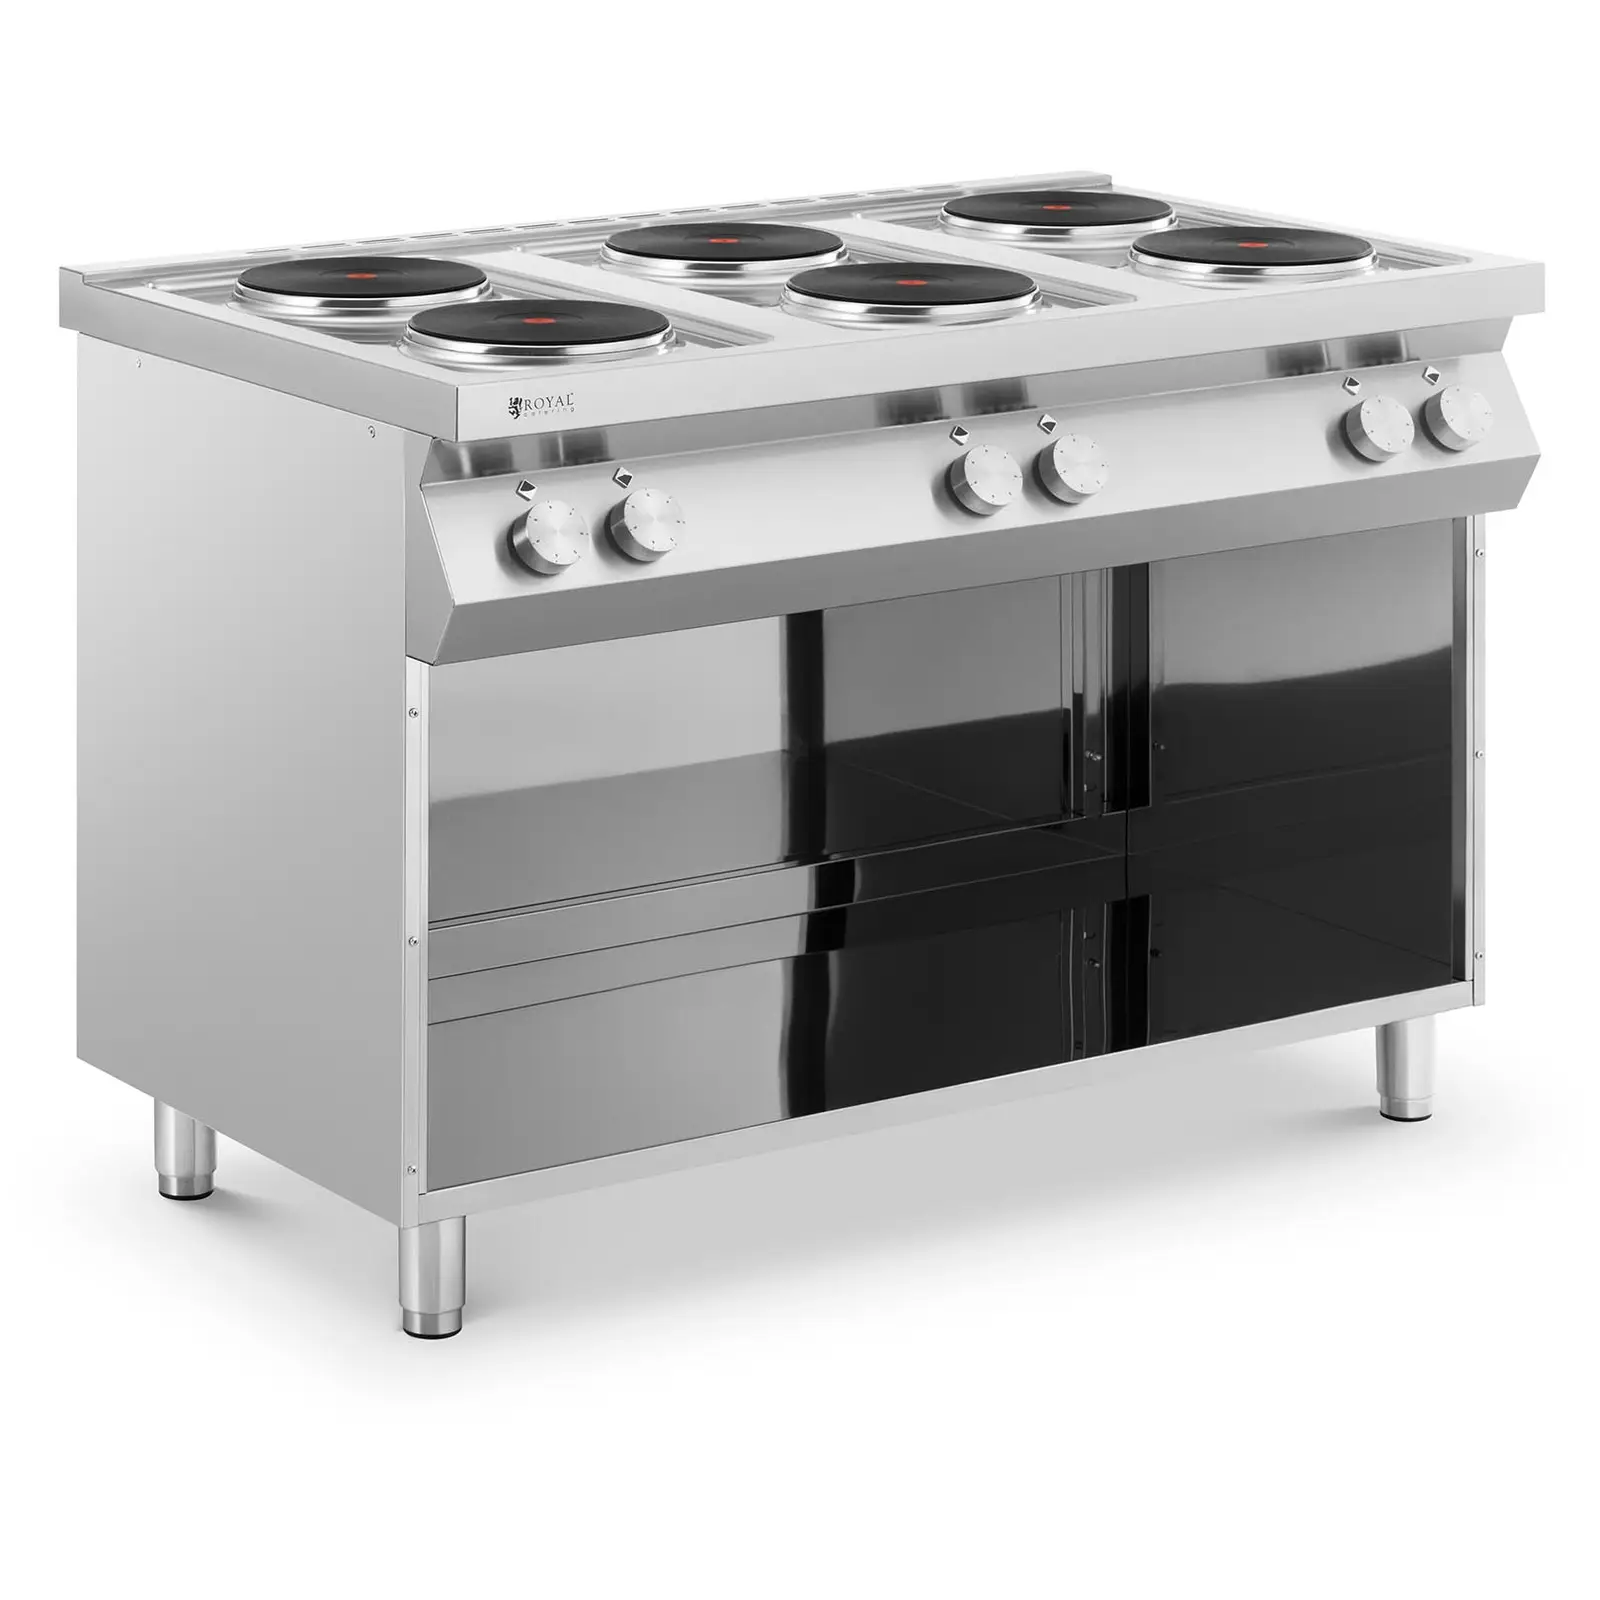 Electric Cooker - 15600 W - 6 plates - base cabinet - Royal Catering